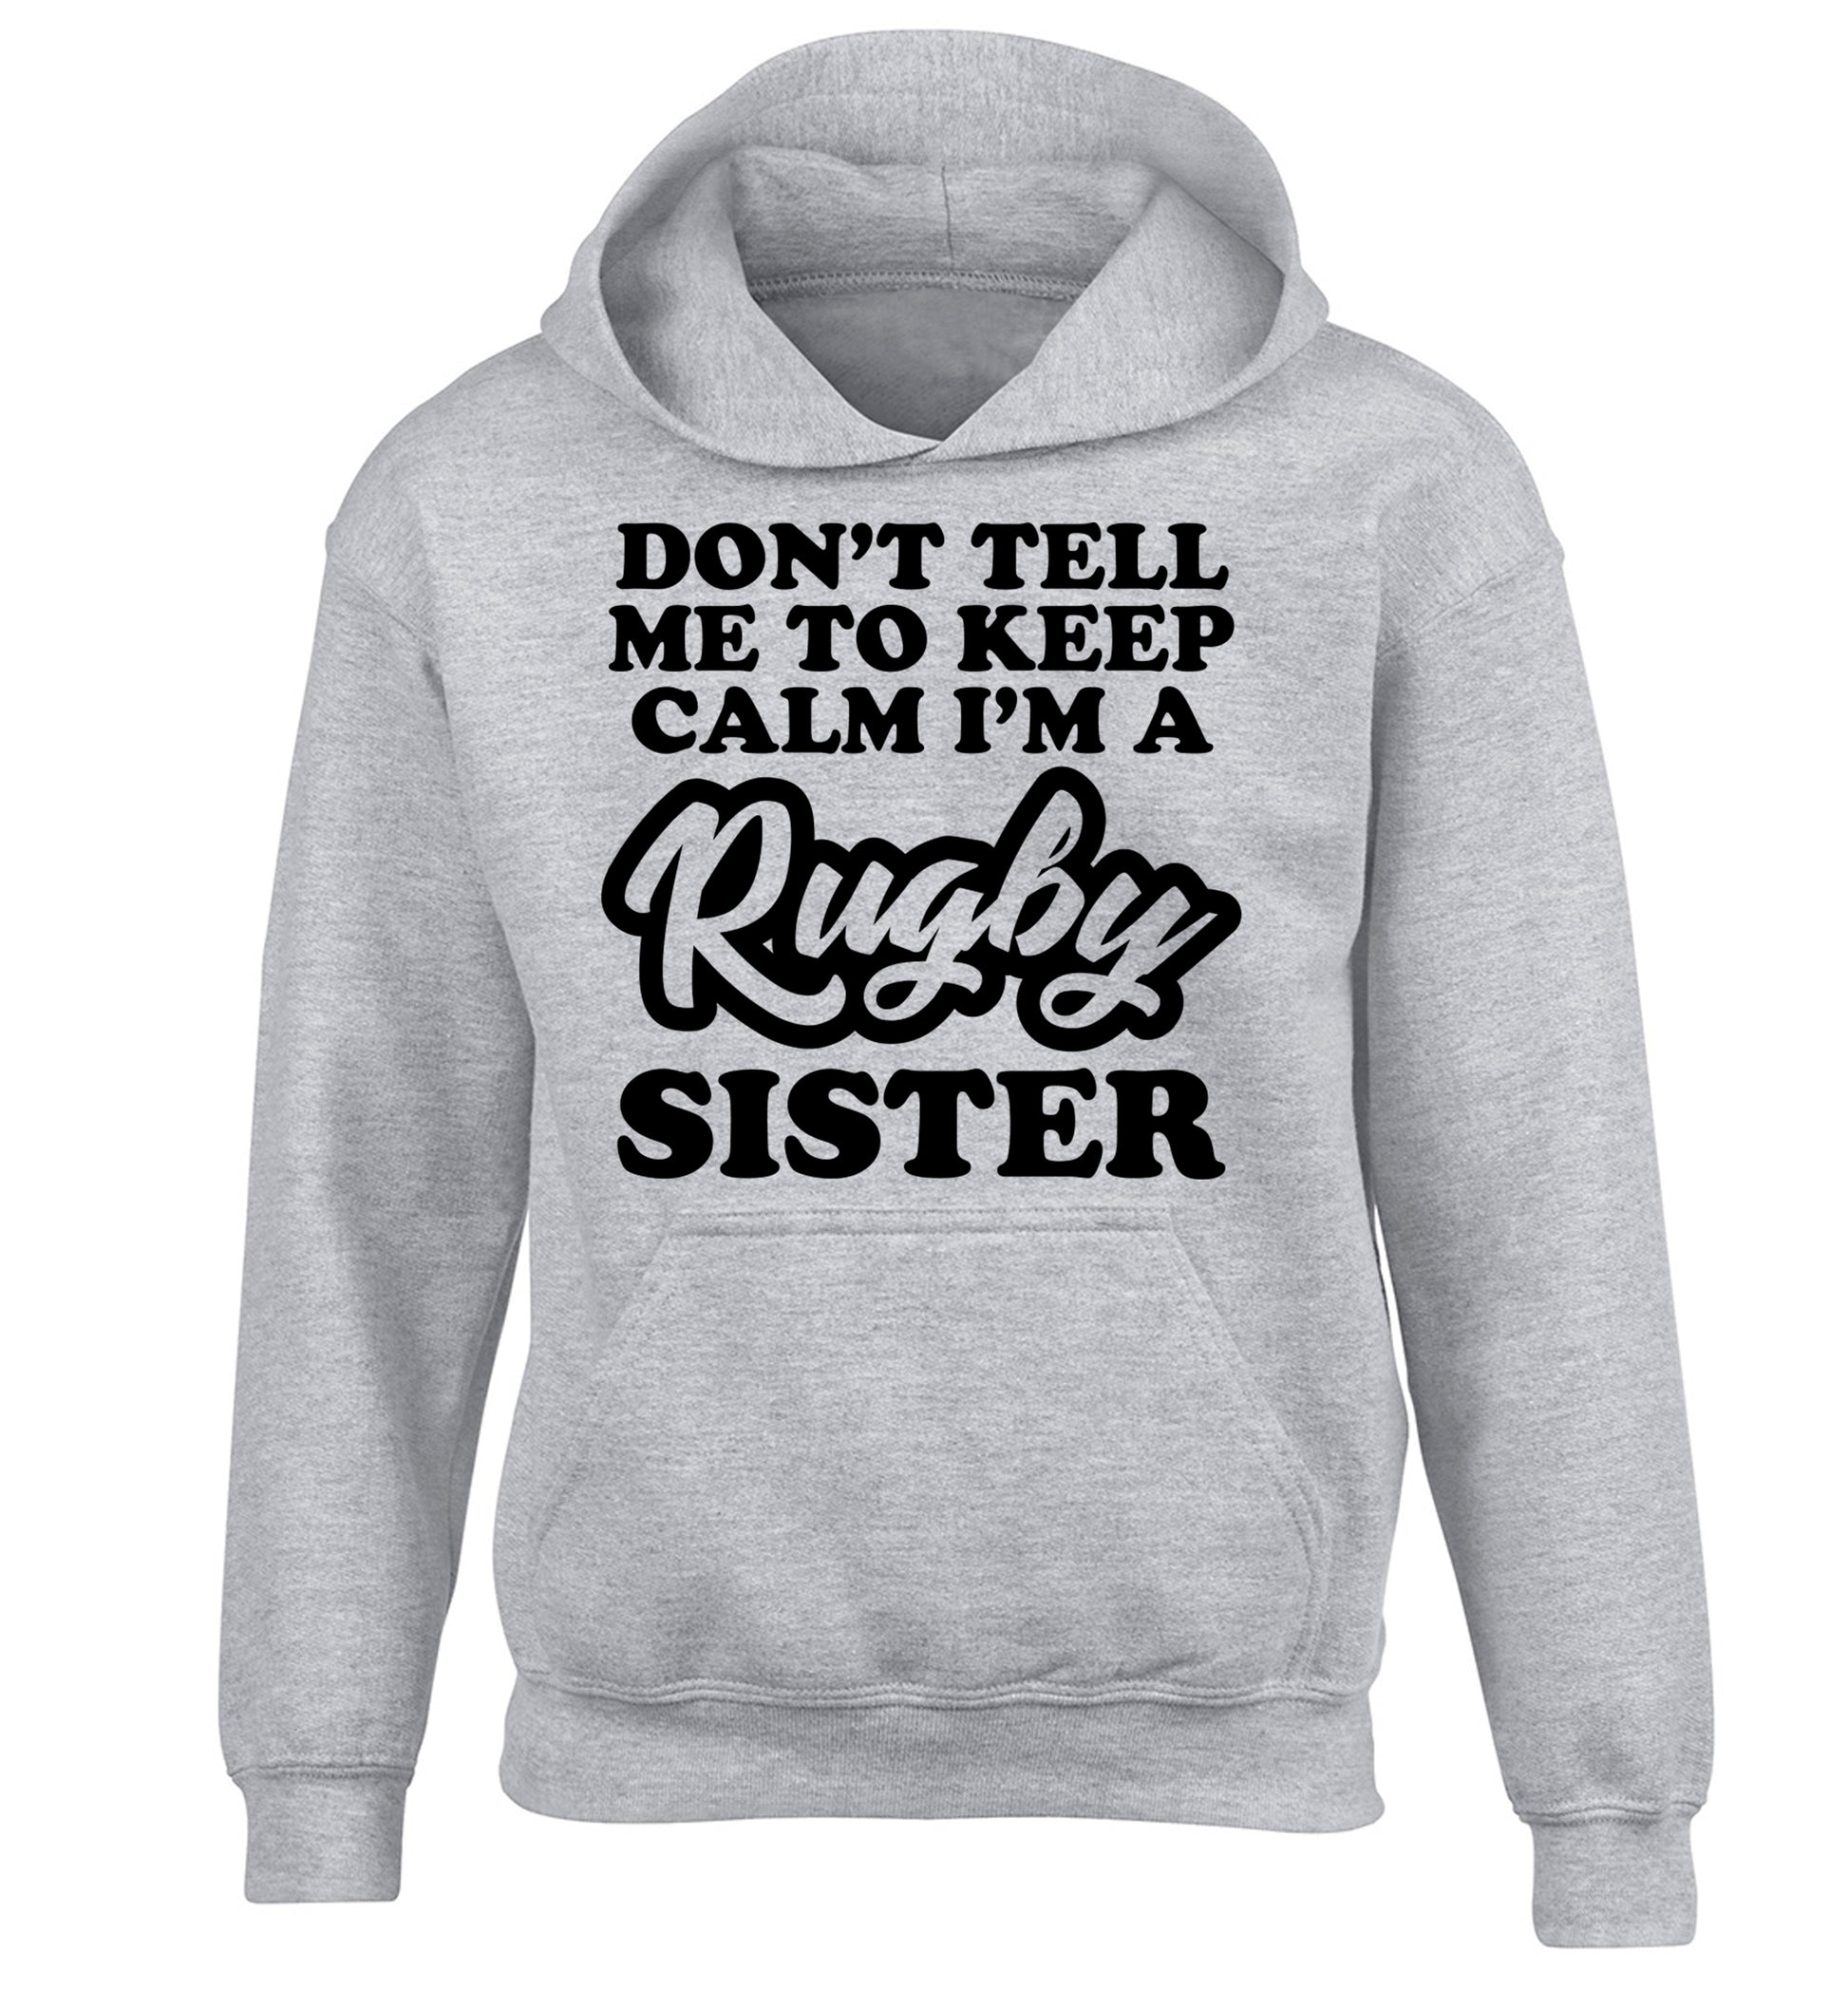 Don't tell me keep calm I'm a rugby sister children's grey hoodie 12-13 Years